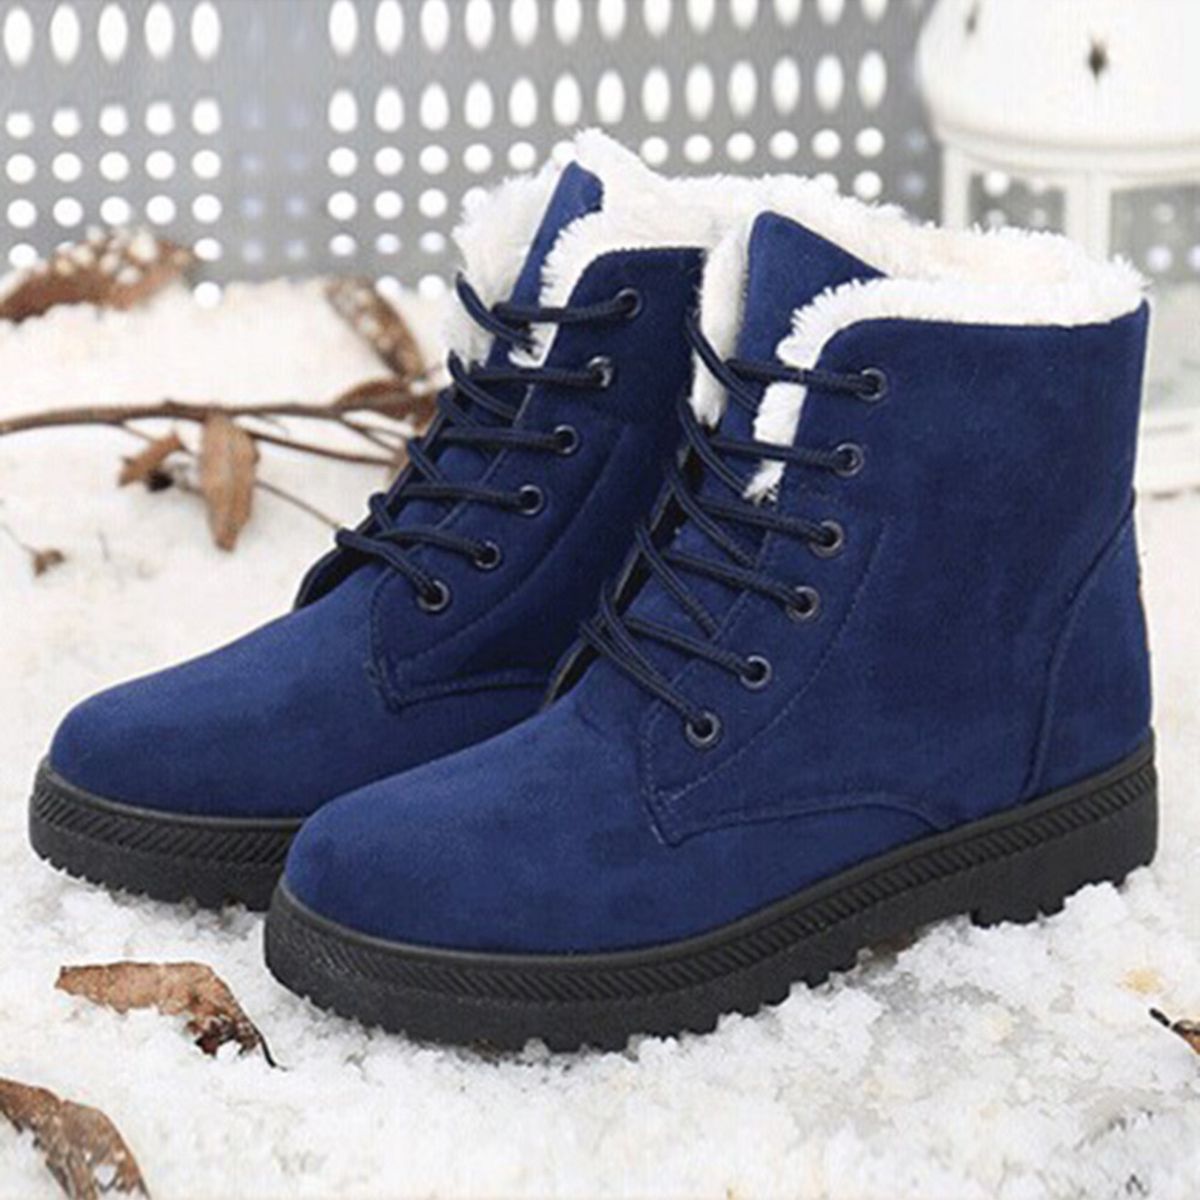 8 Winter Shoes That Every College Girl Should Have